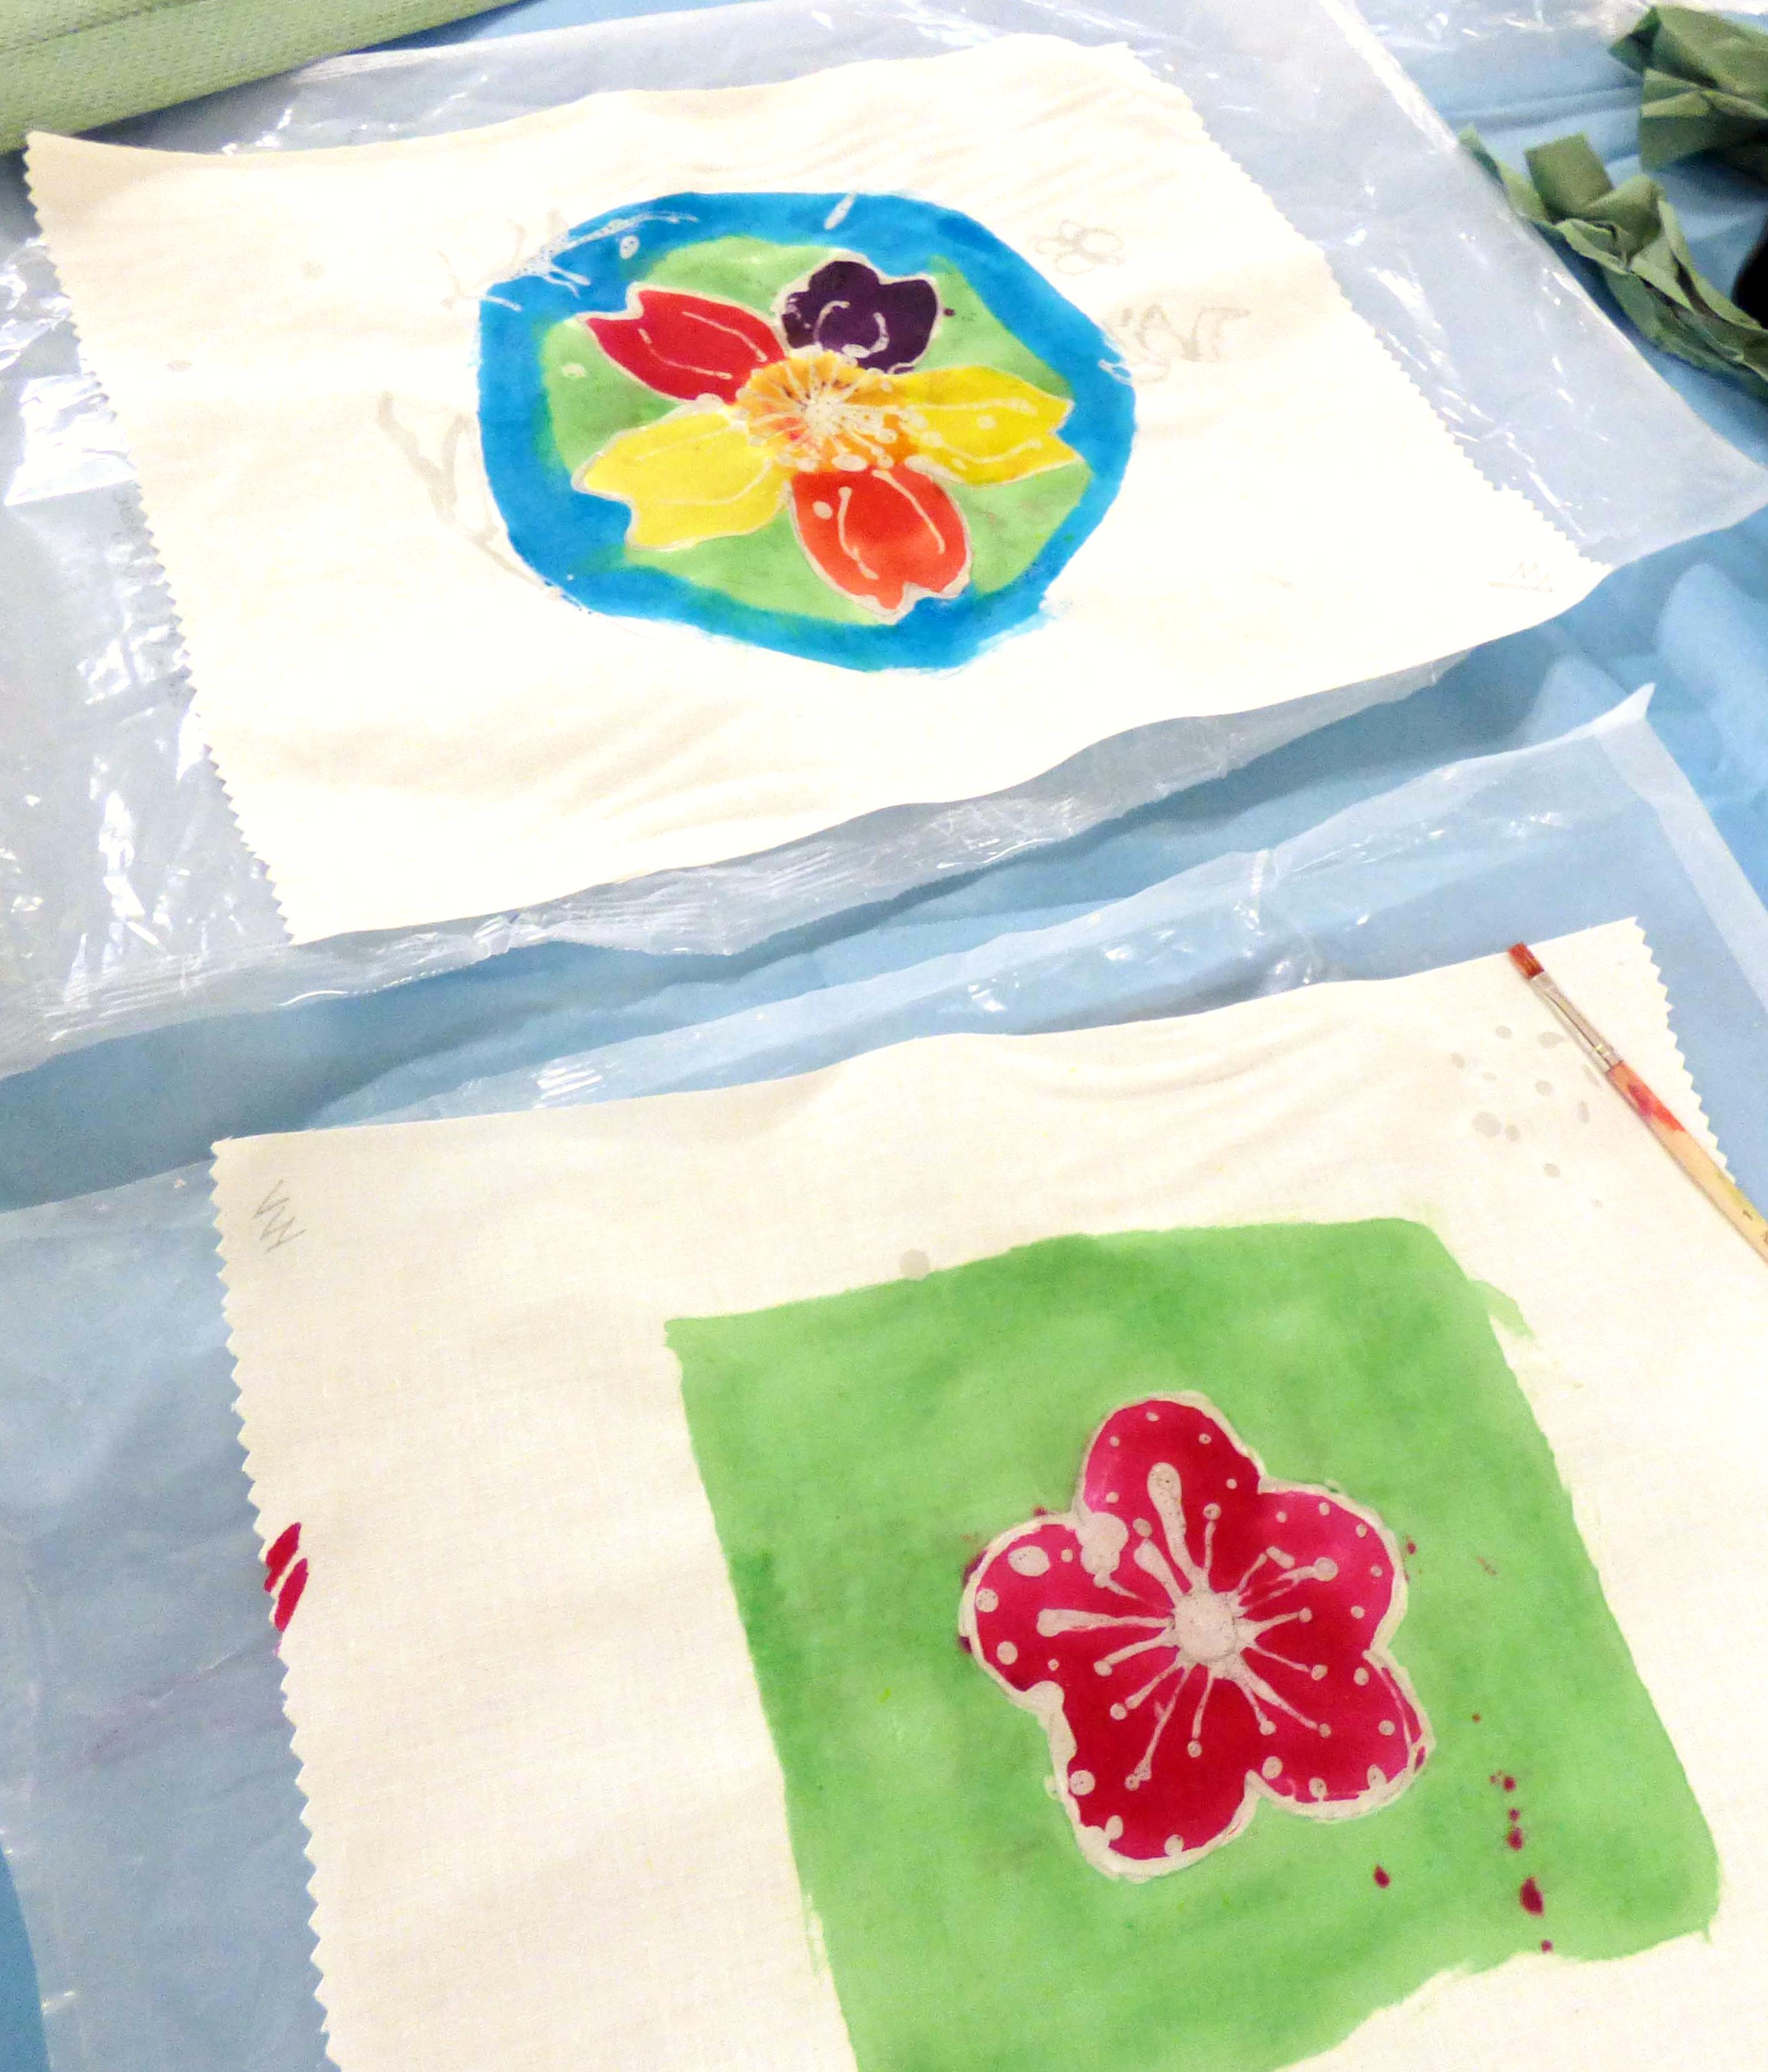 student's work in progress at "A Taste of Indonesian Batik" workshop with Victoria Riley, Feb 2020